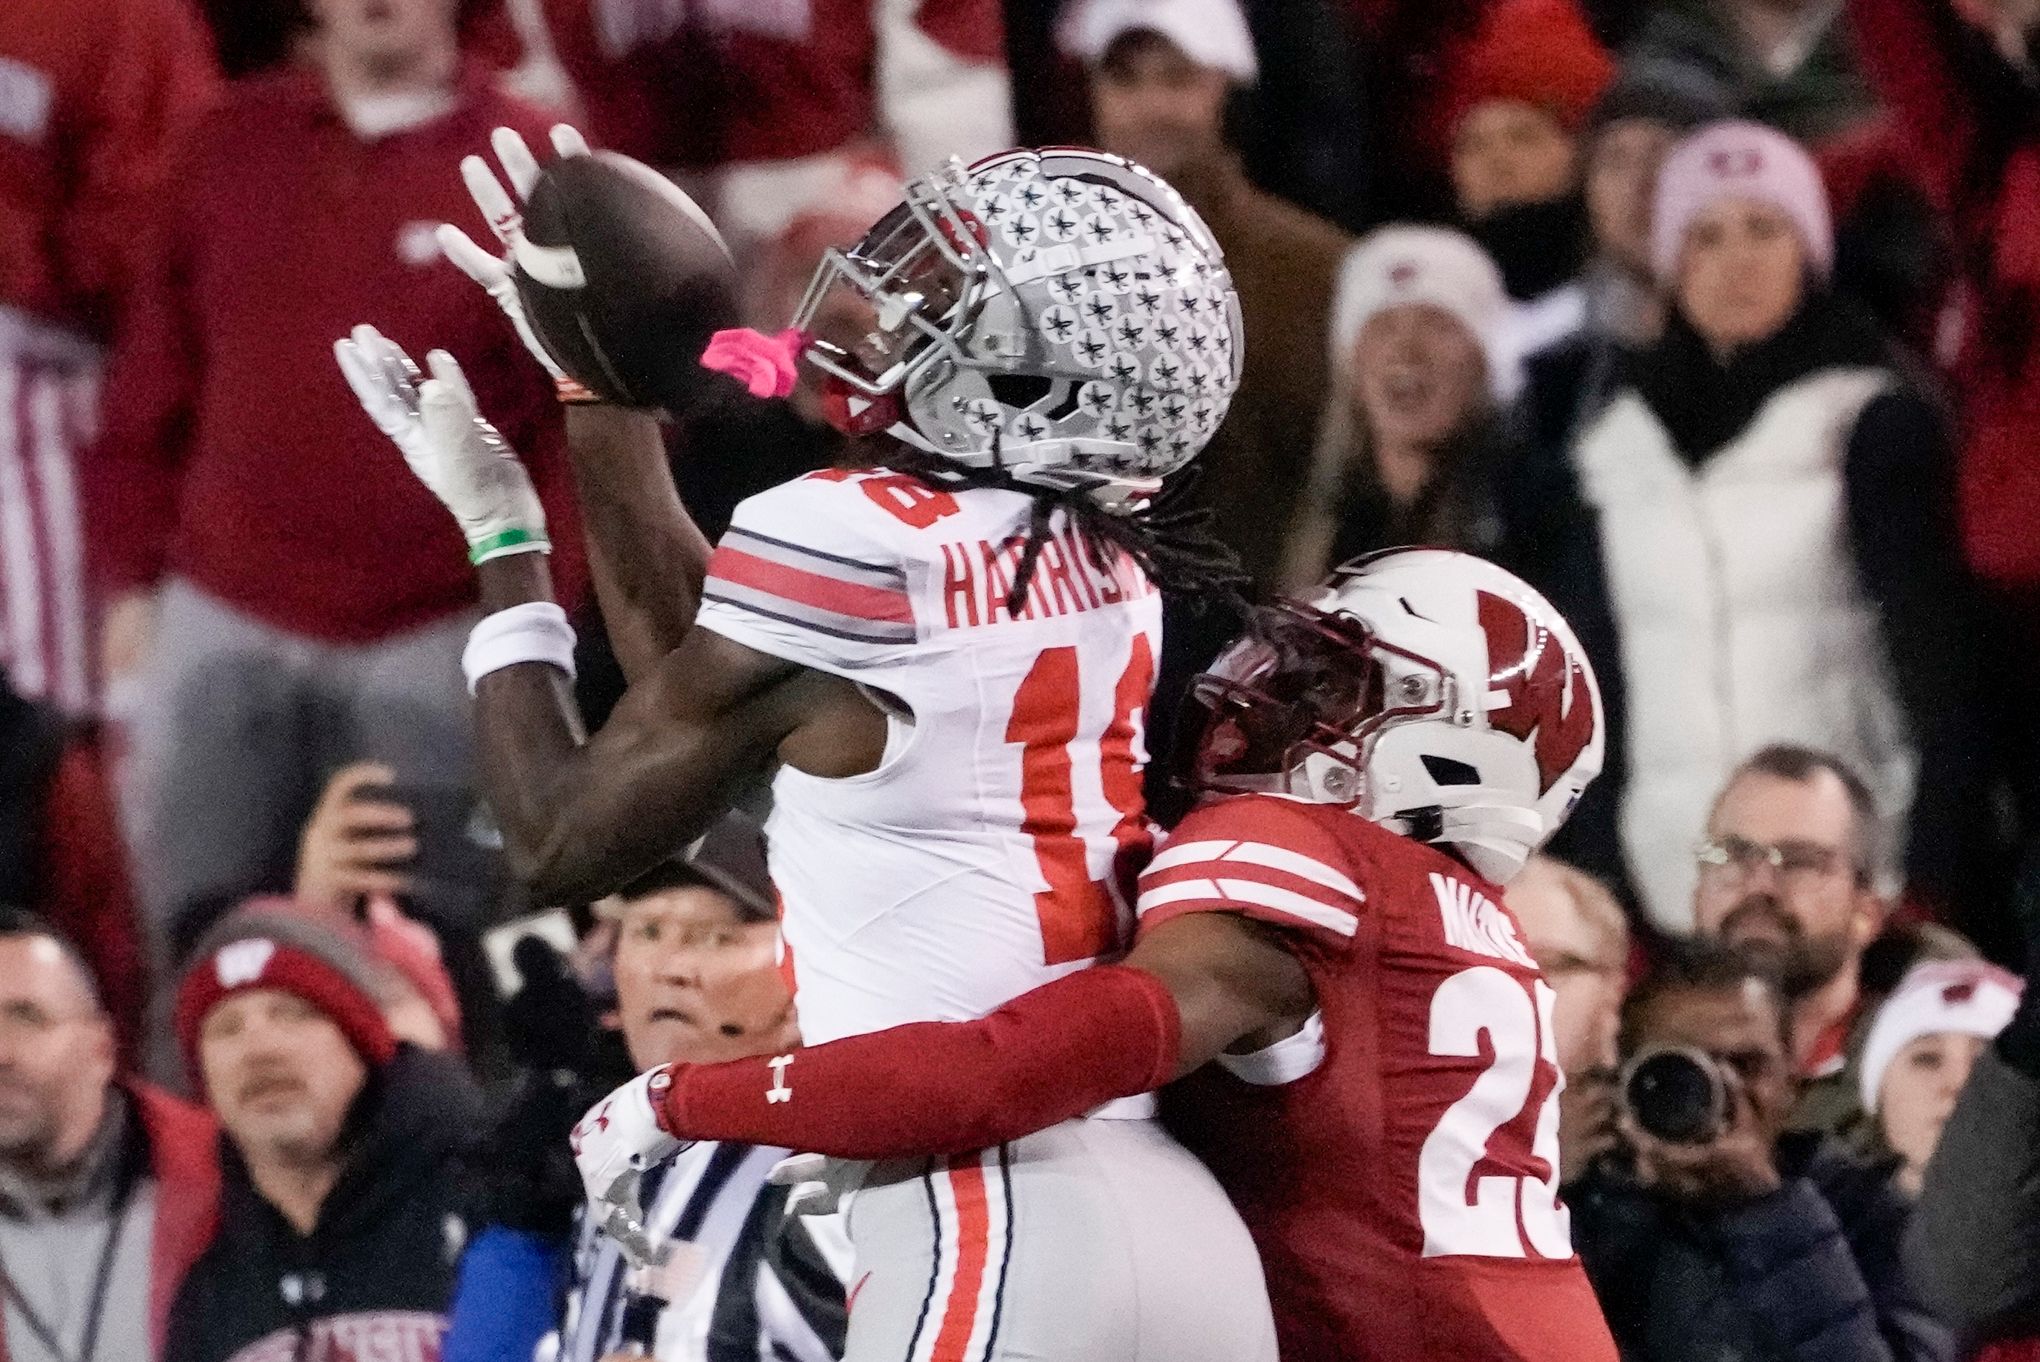 Ohio State's Marvin Harrison Jr. making own impact as a WR